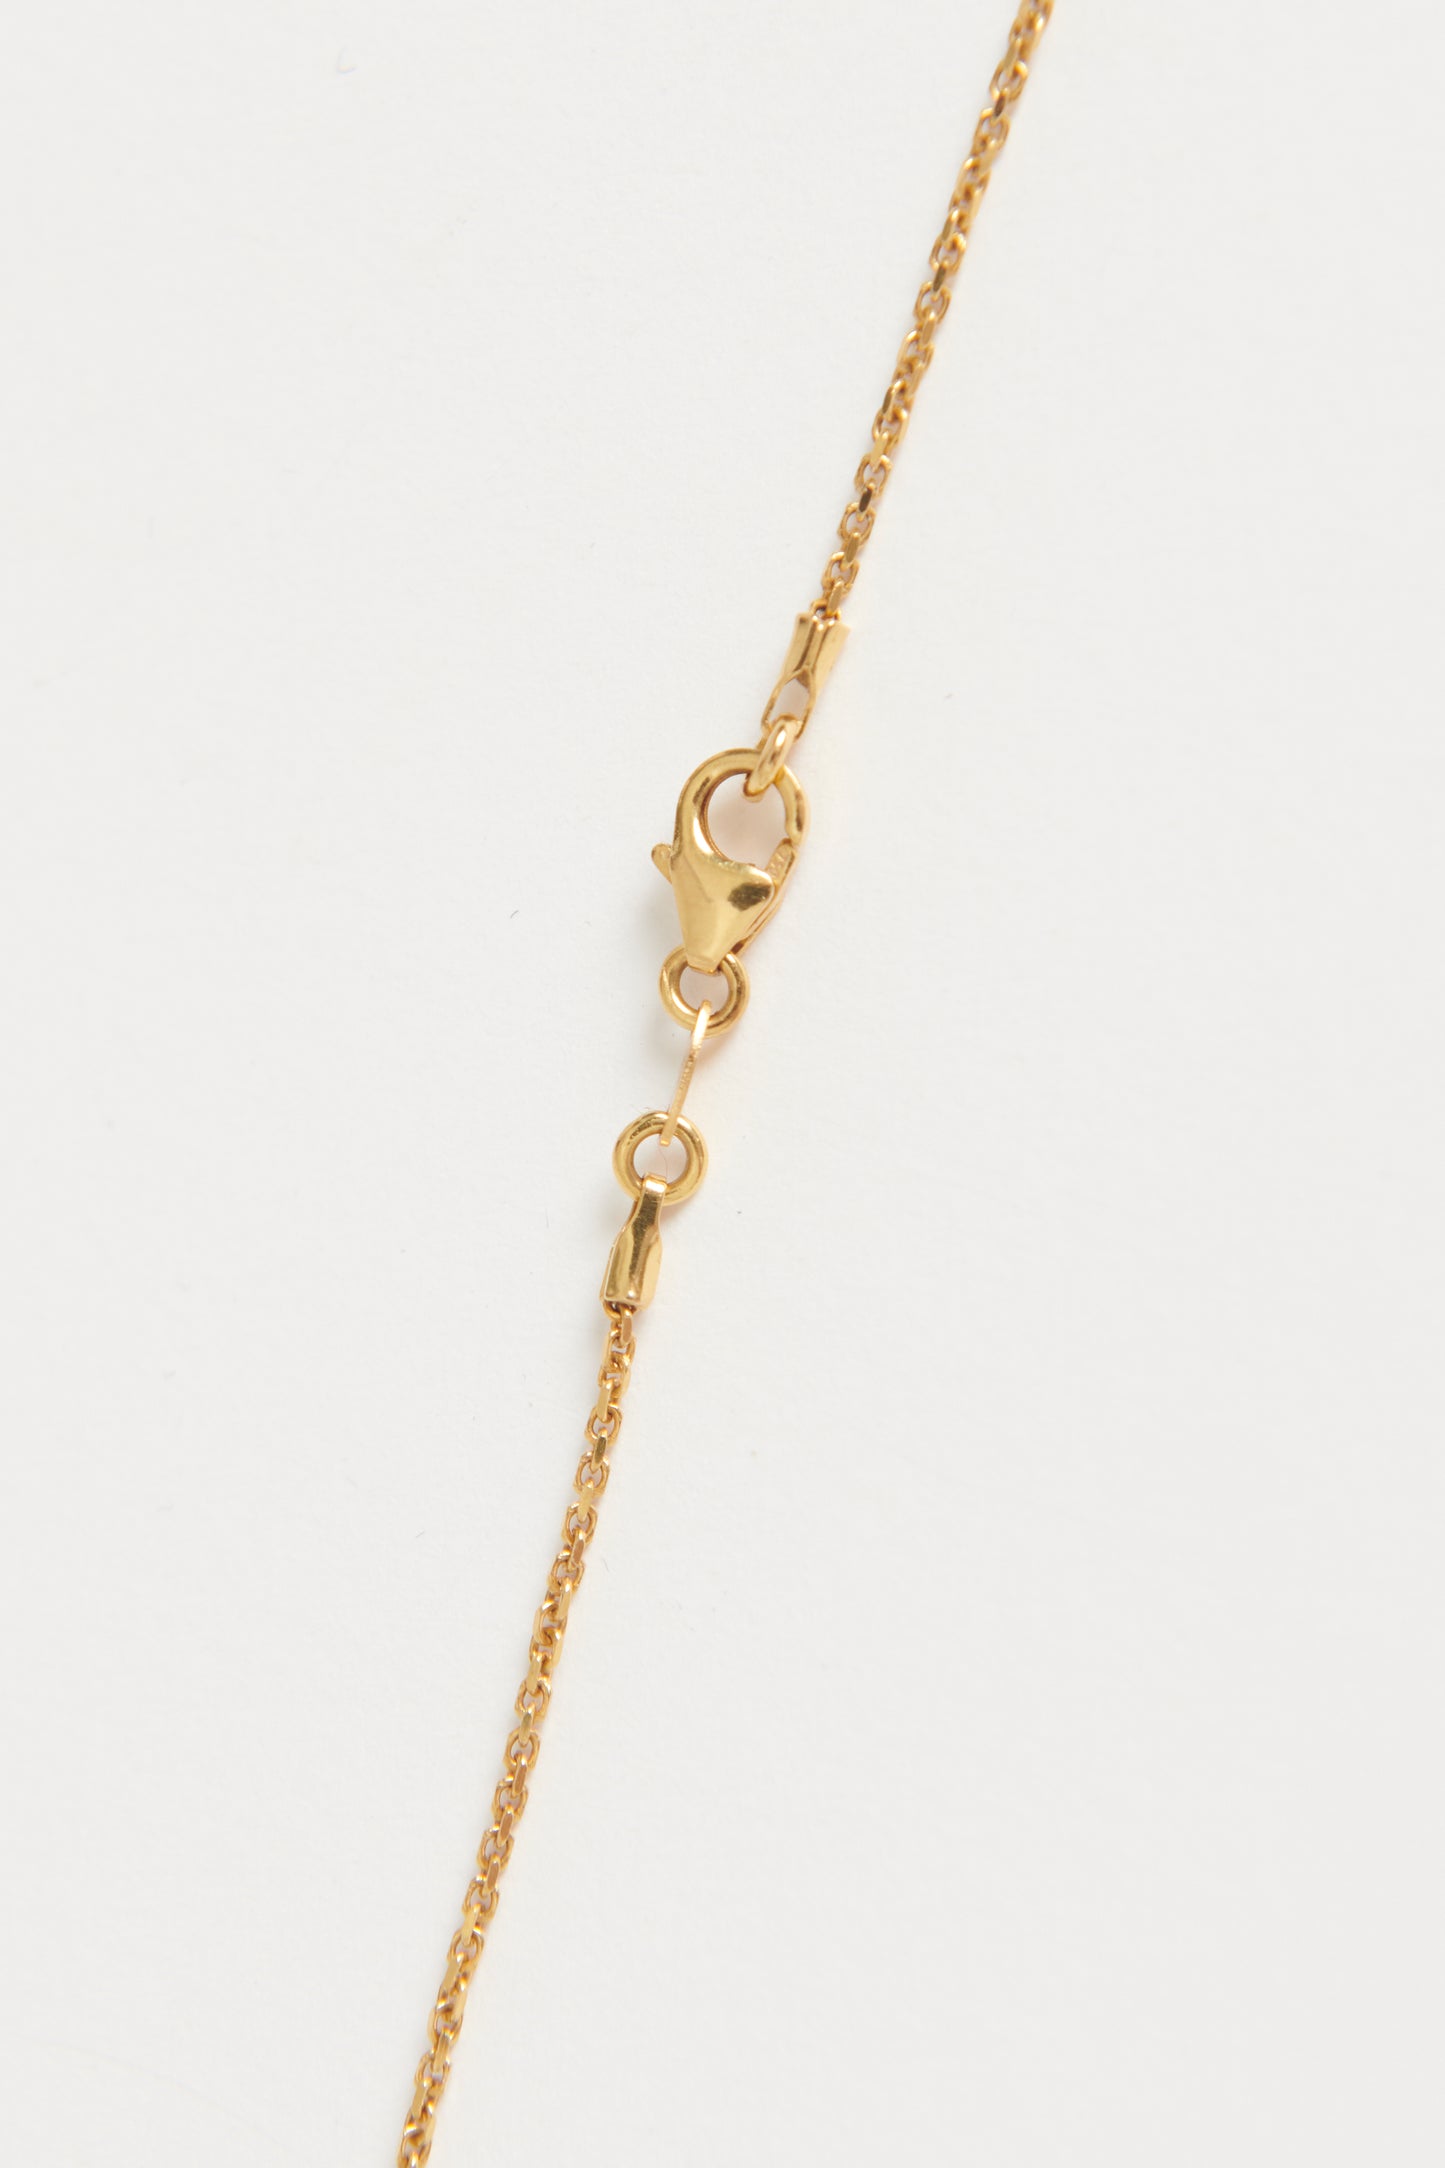 18K Yellow Gold Enamel Ball Charm Preowned Necklace